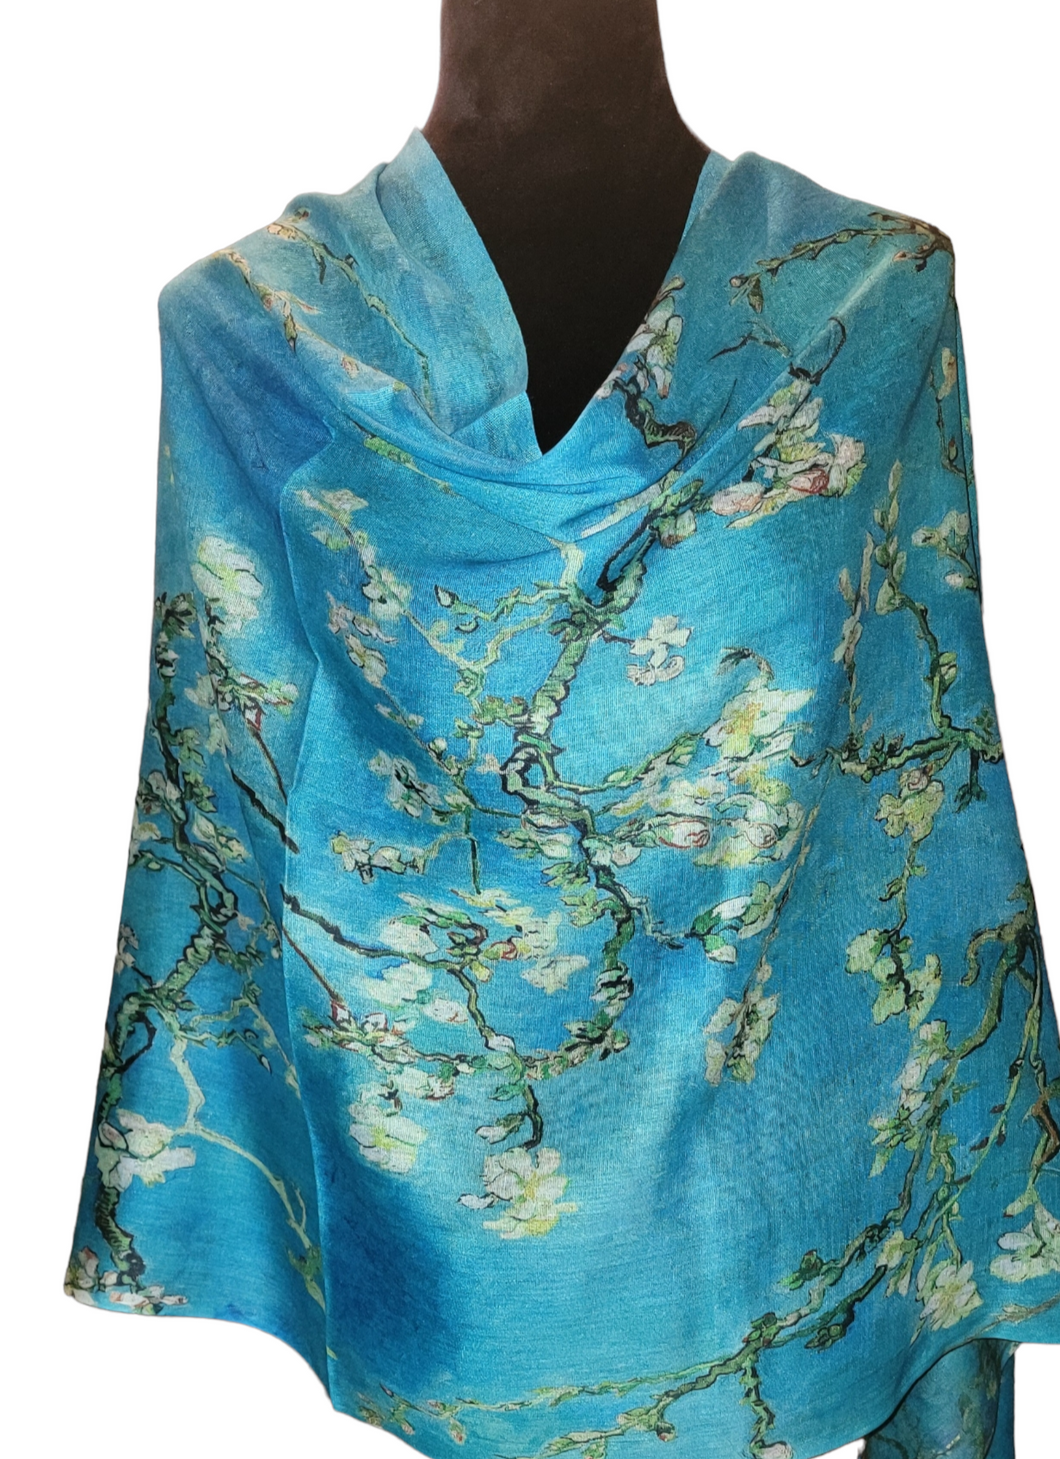 Wrap Yourself in Art: Vibrant Print Shawls Inspired by Fine Art - 56